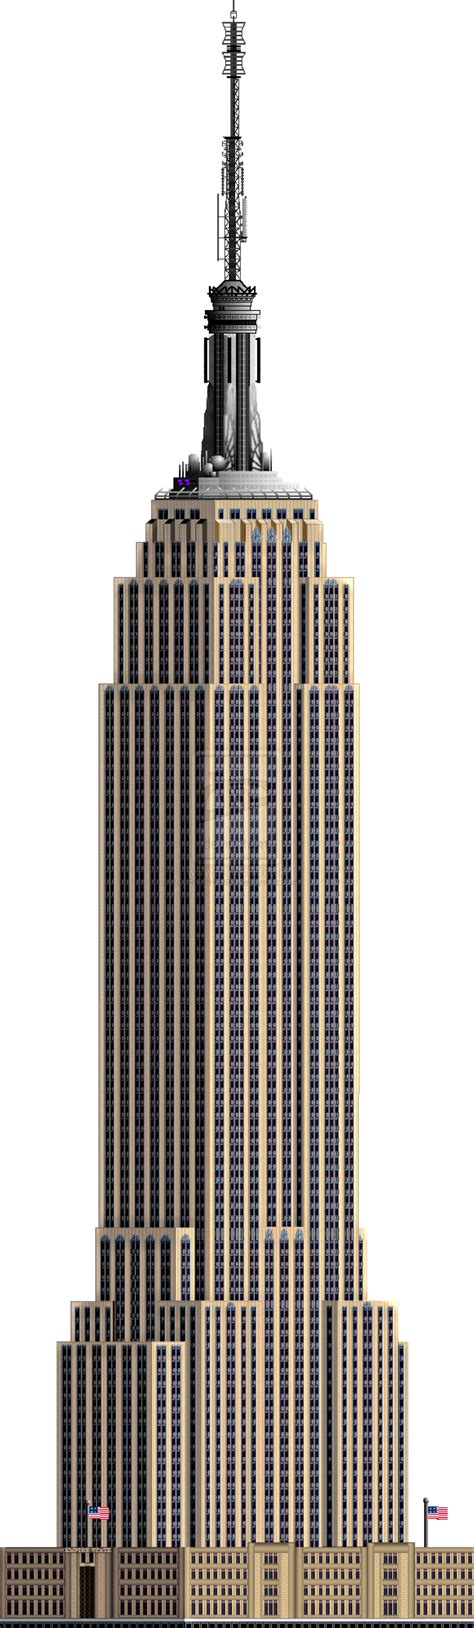 Collection Of Png Tall Building Pluspng Images